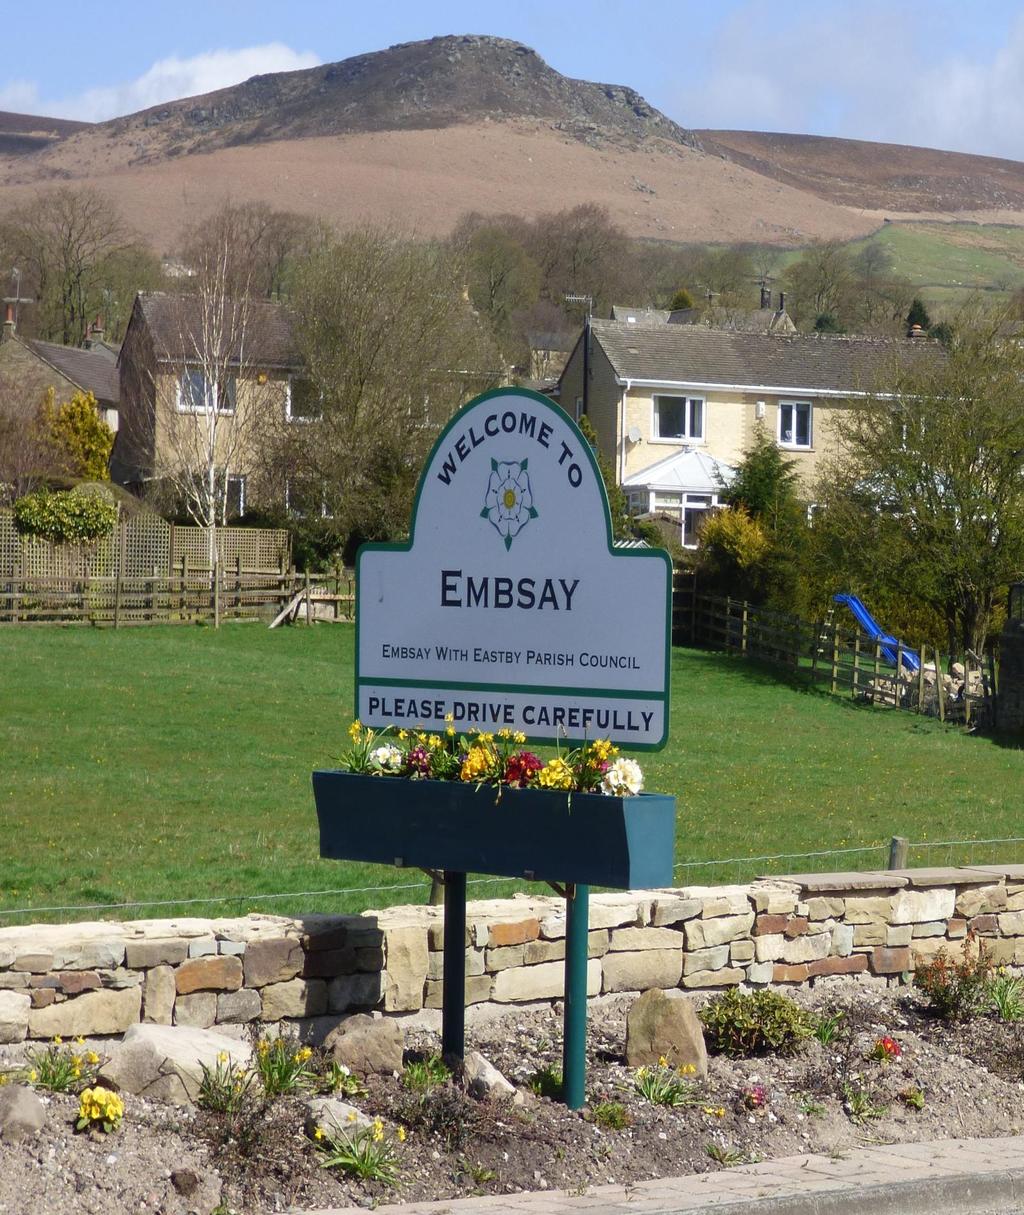 EMBSAY WITH EASTBY PARISH